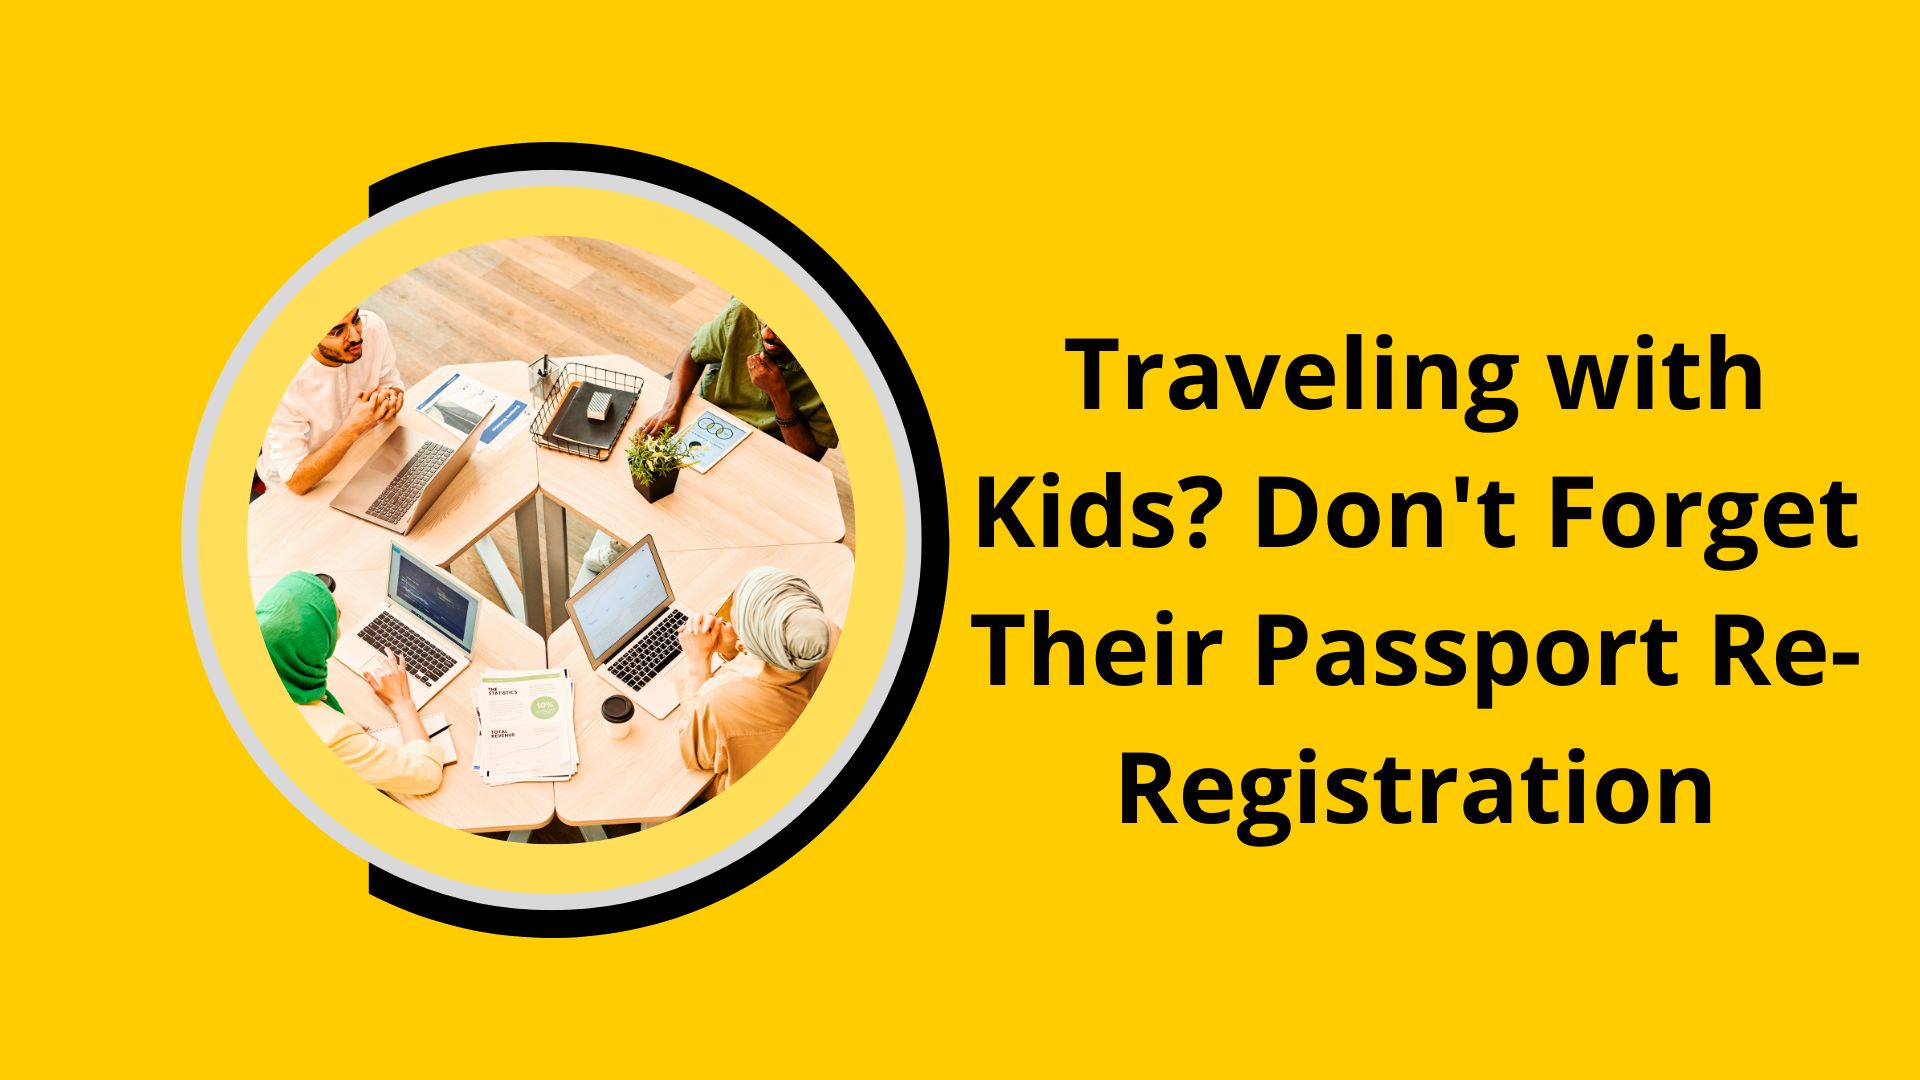 Traveling with Kids Don't Forget Their Passport Re-Registration